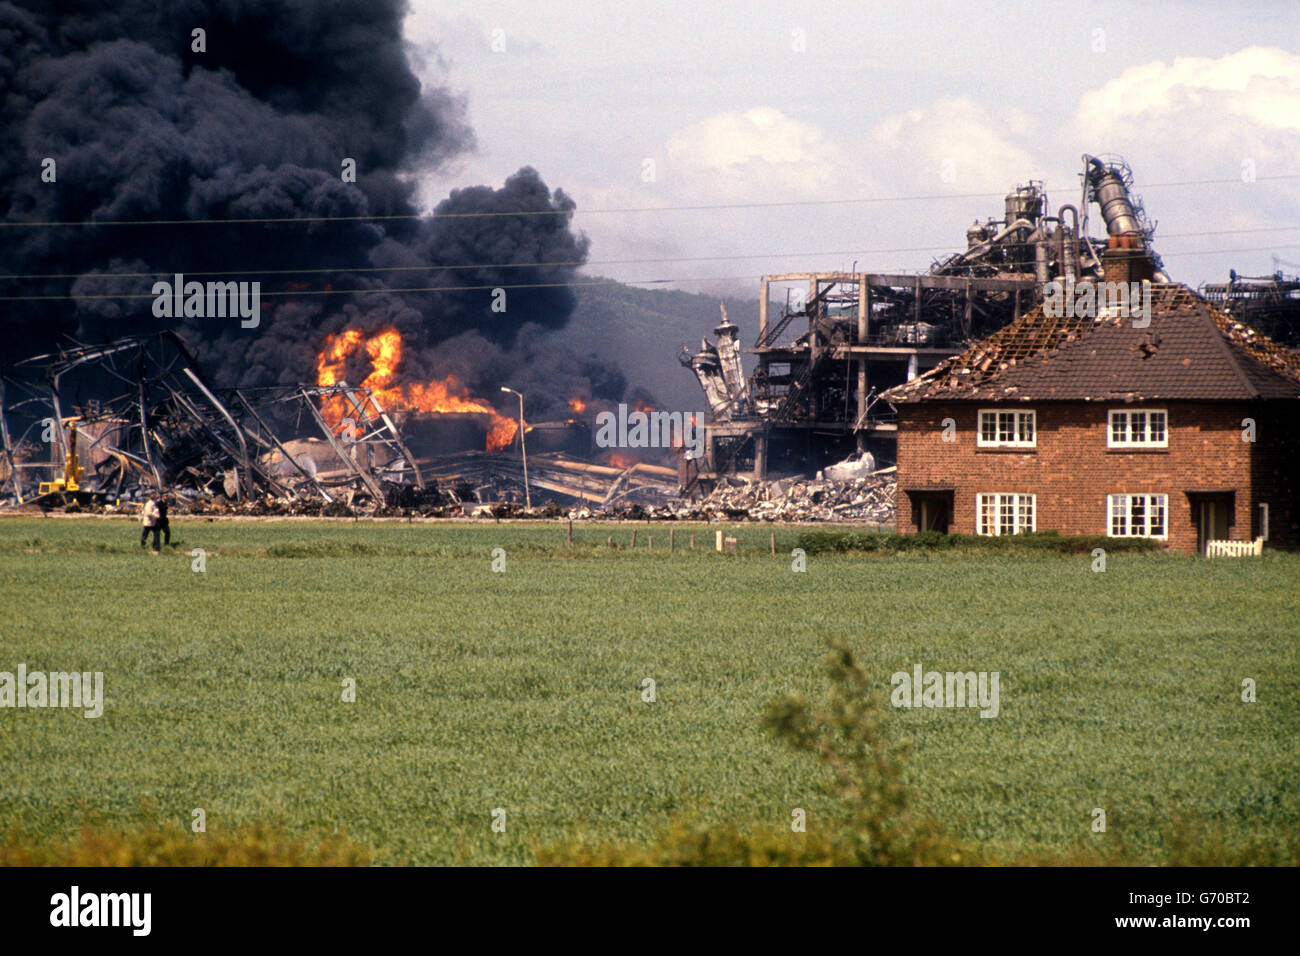 Damaged houses near the vast column of smoke and flame from the devastated factory at the Nypro UK chemical plant at Flixborough, North Lincolnshire. Stock Photo